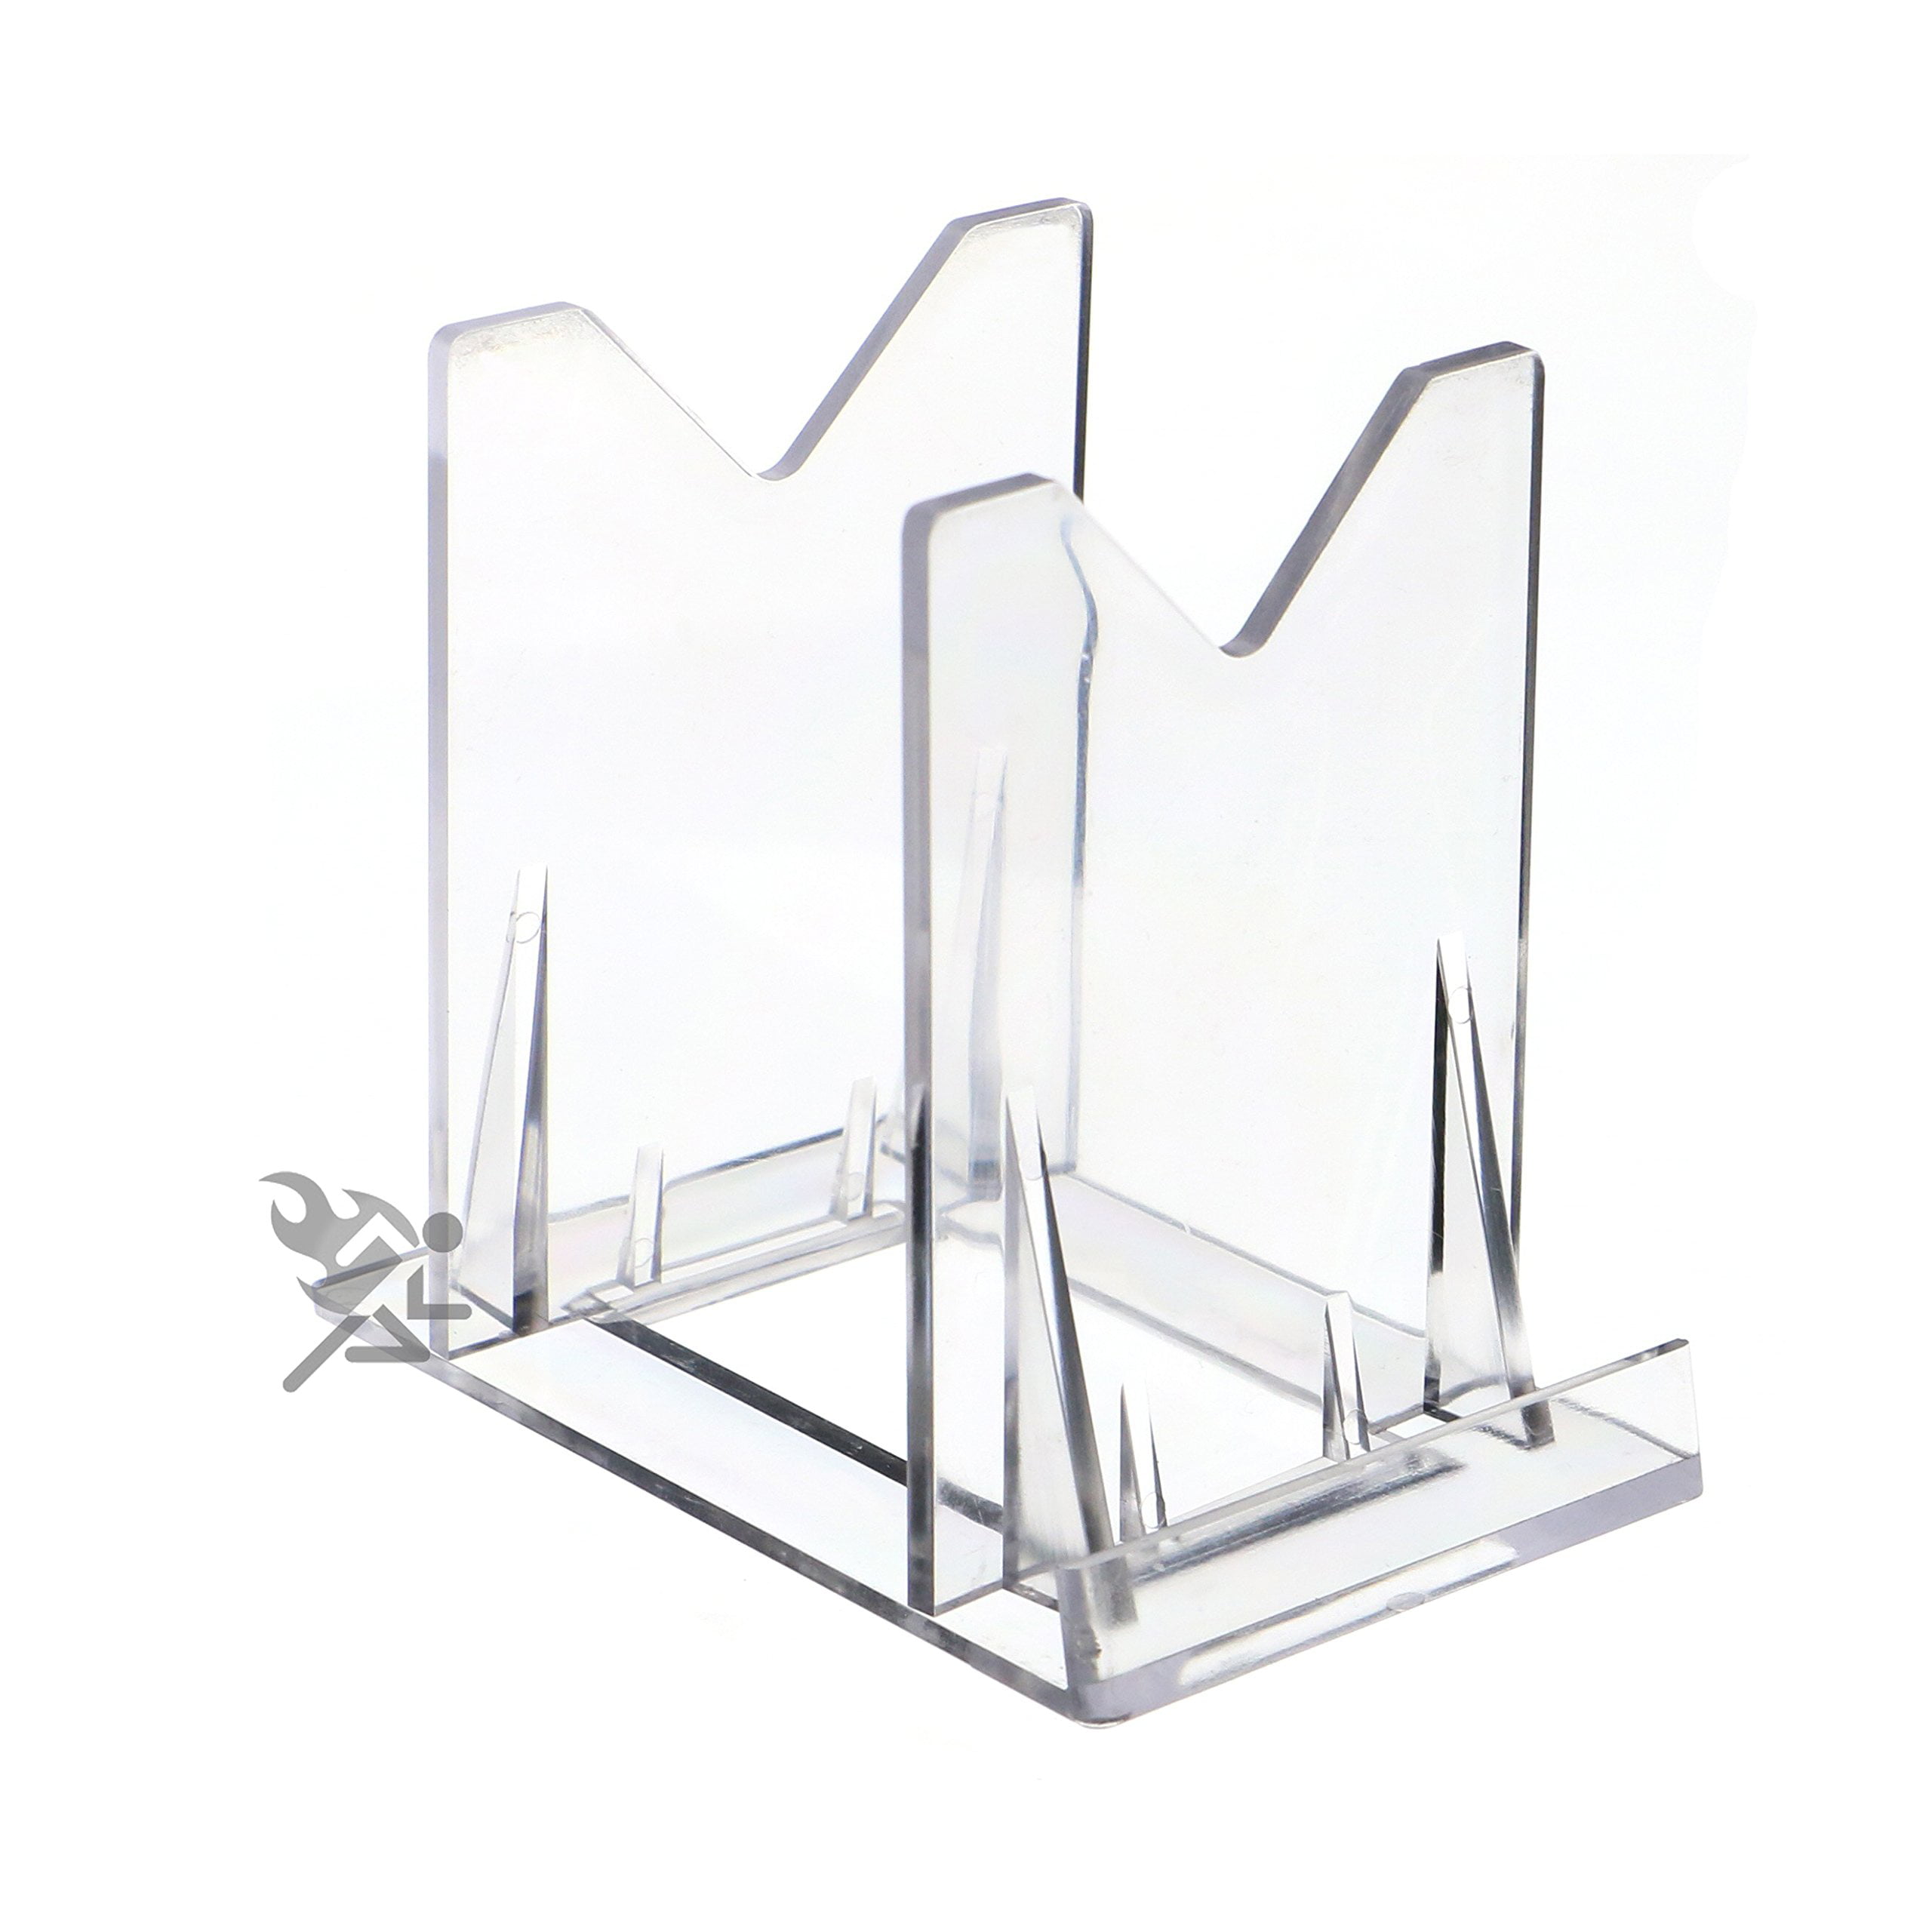 *5 Fishing Lure 2" adjustable Display Stand Holder Easels 